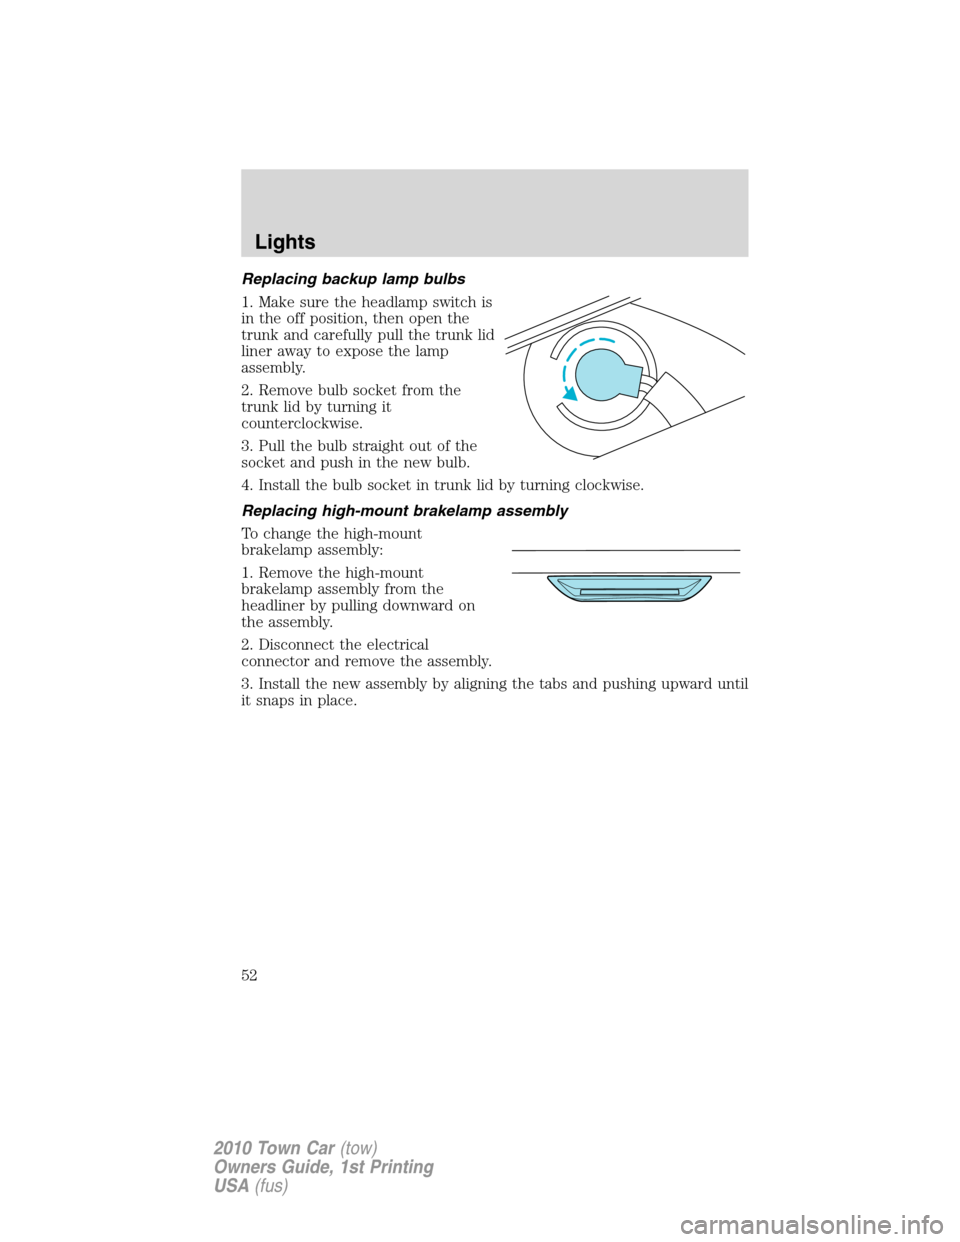 LINCOLN TOWN CAR 2010 Workshop Manual Replacing backup lamp bulbs
1. Make sure the headlamp switch is
in the off position, then open the
trunk and carefully pull the trunk lid
liner away to expose the lamp
assembly.
2. Remove bulb socket 